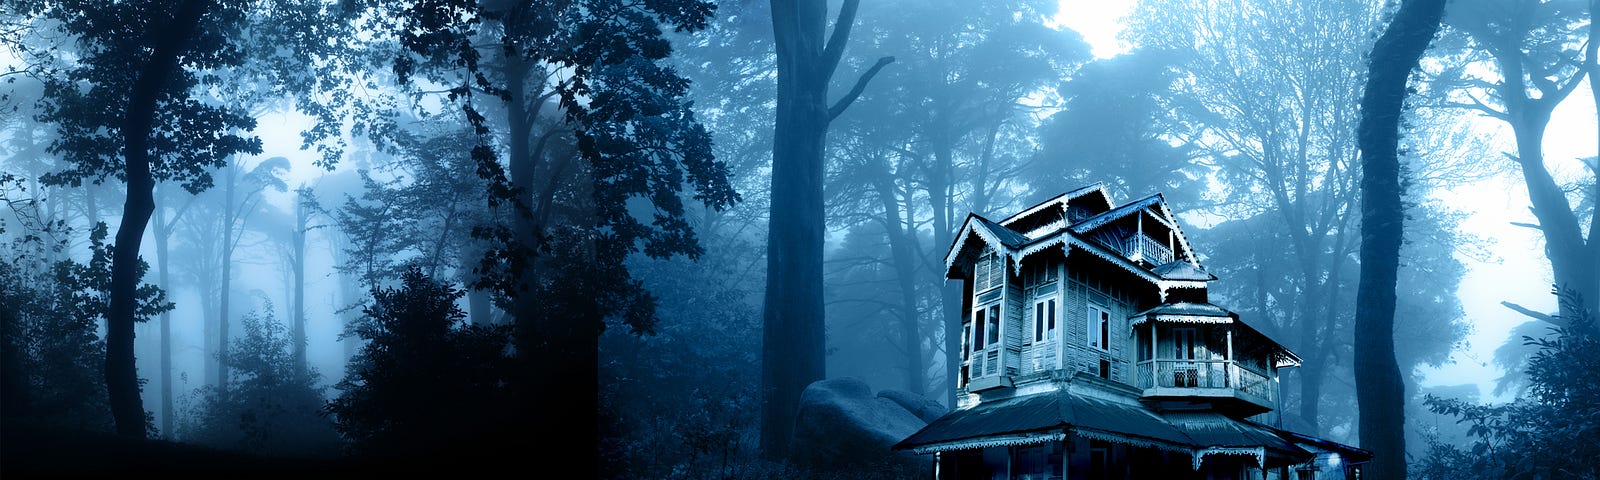 Haunted house in a dark wood. The picture is made up of green hues.